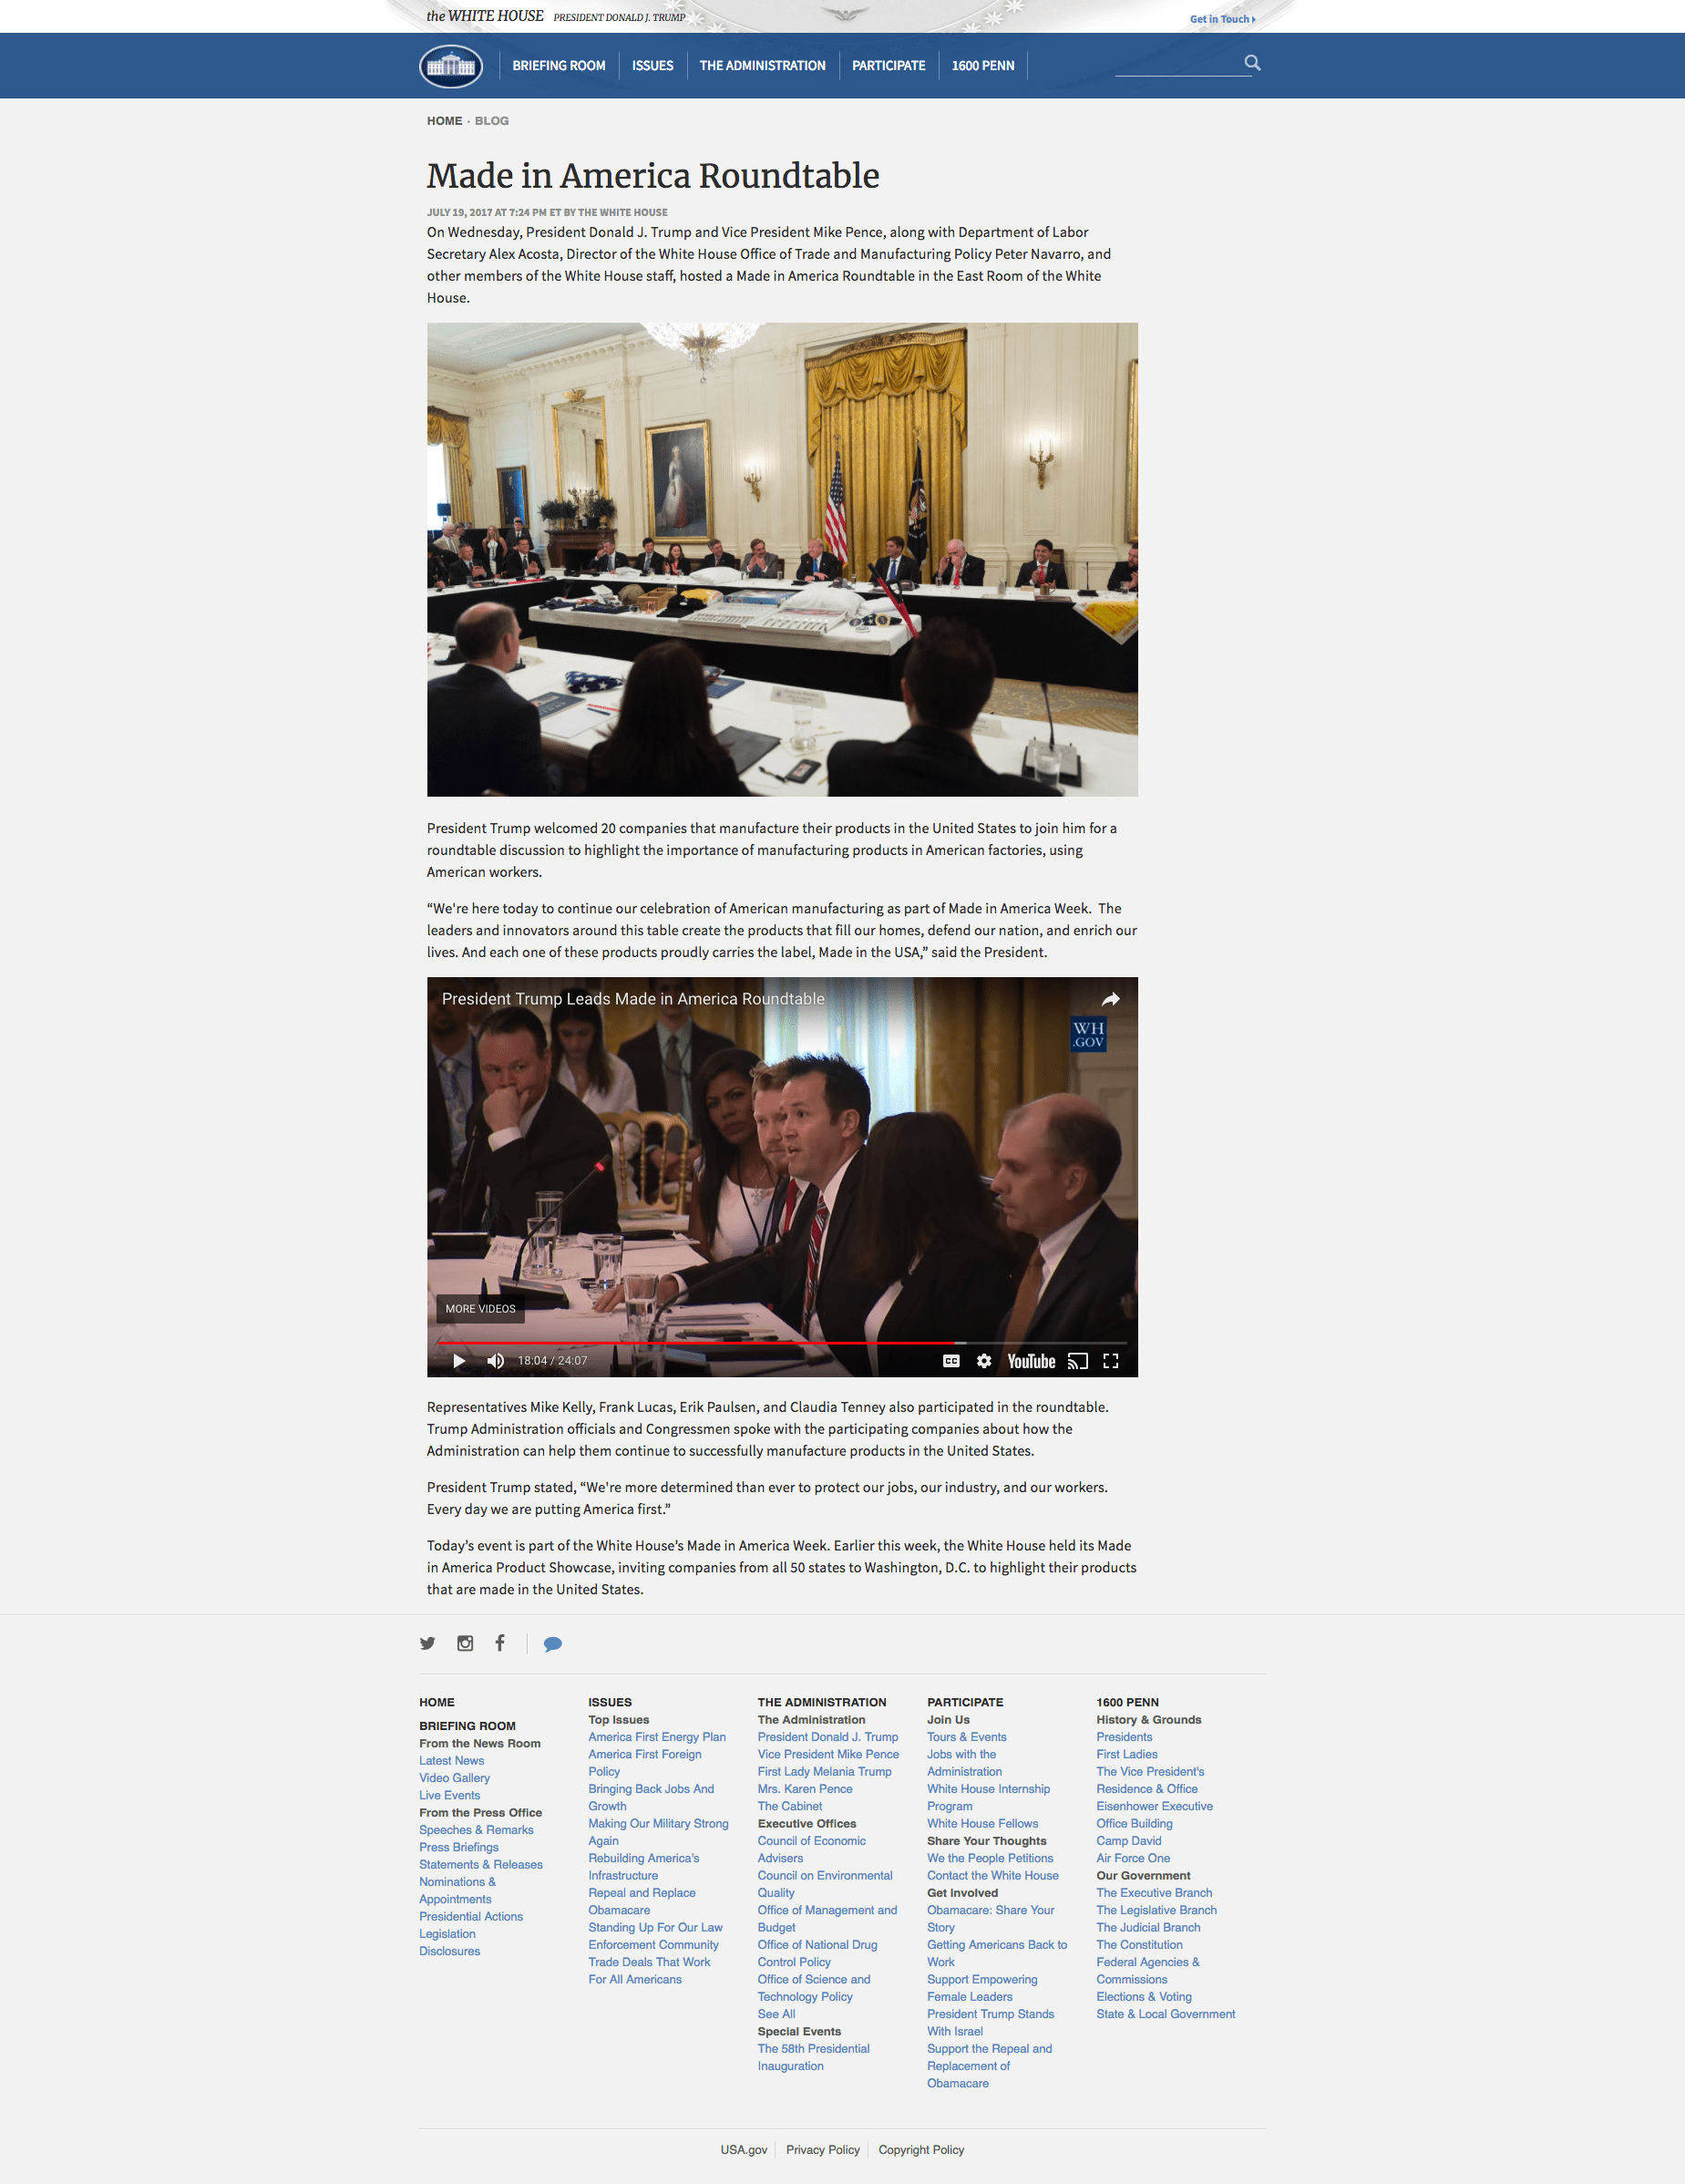 White House Article on Made in America Roundtable with Margarita Mendoza and Kurt Uhlir v2